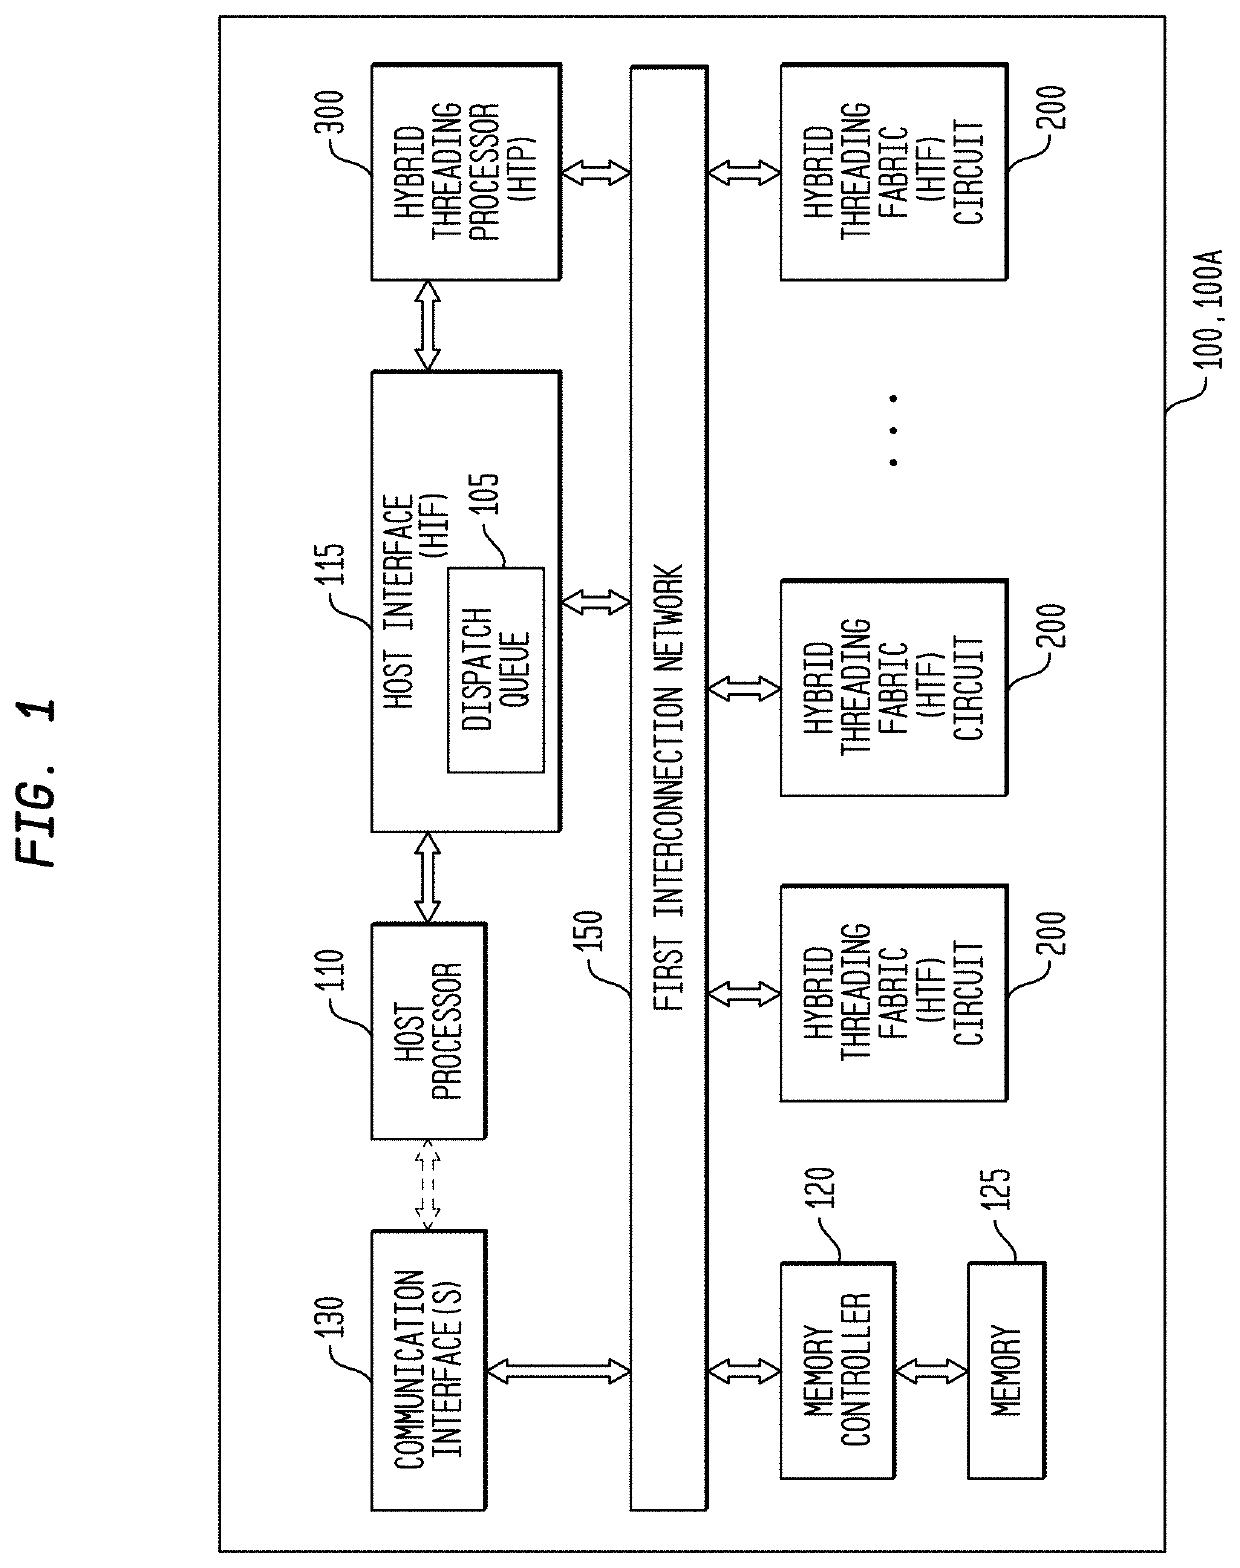 Computational Partition for a Multi-Threaded, Self-Scheduling Reconfigurable Computing Fabric